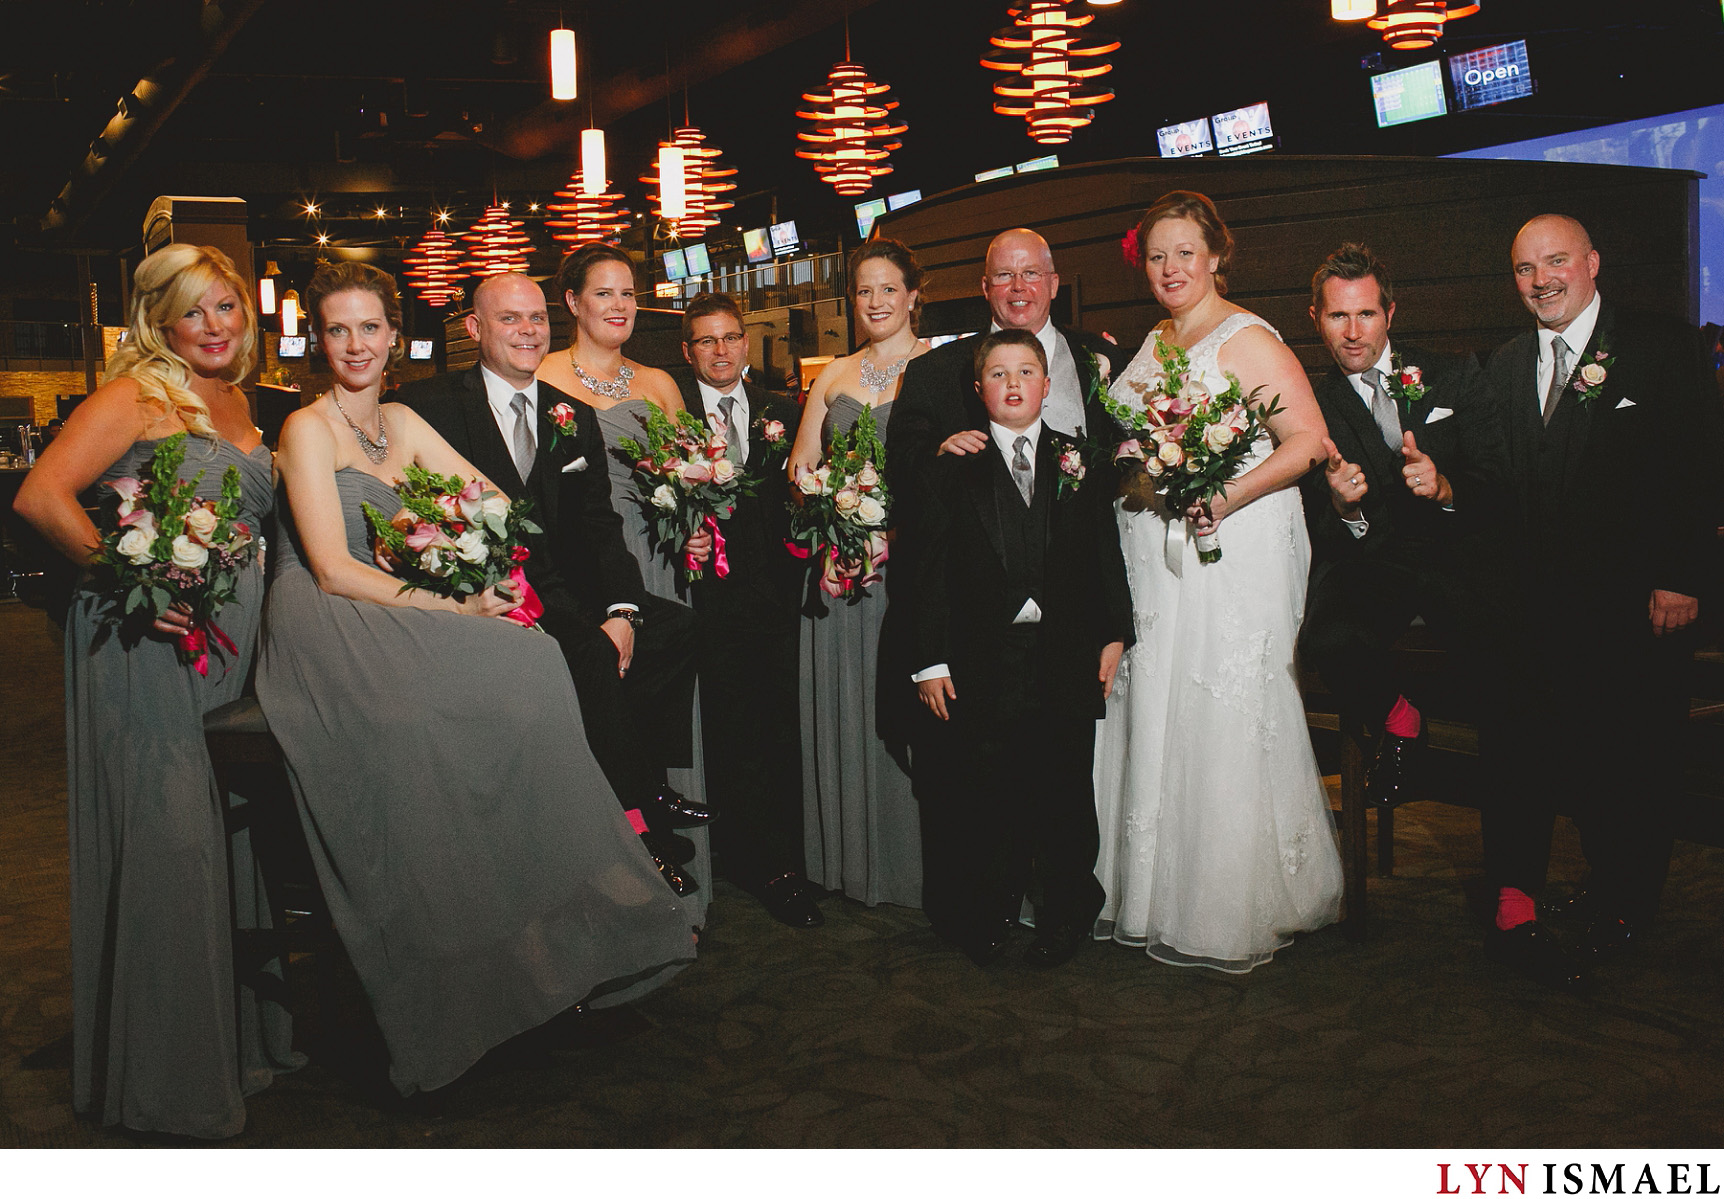 Wedding party photo at Kingpin Bowling Alley in Kitchener, Ontario.